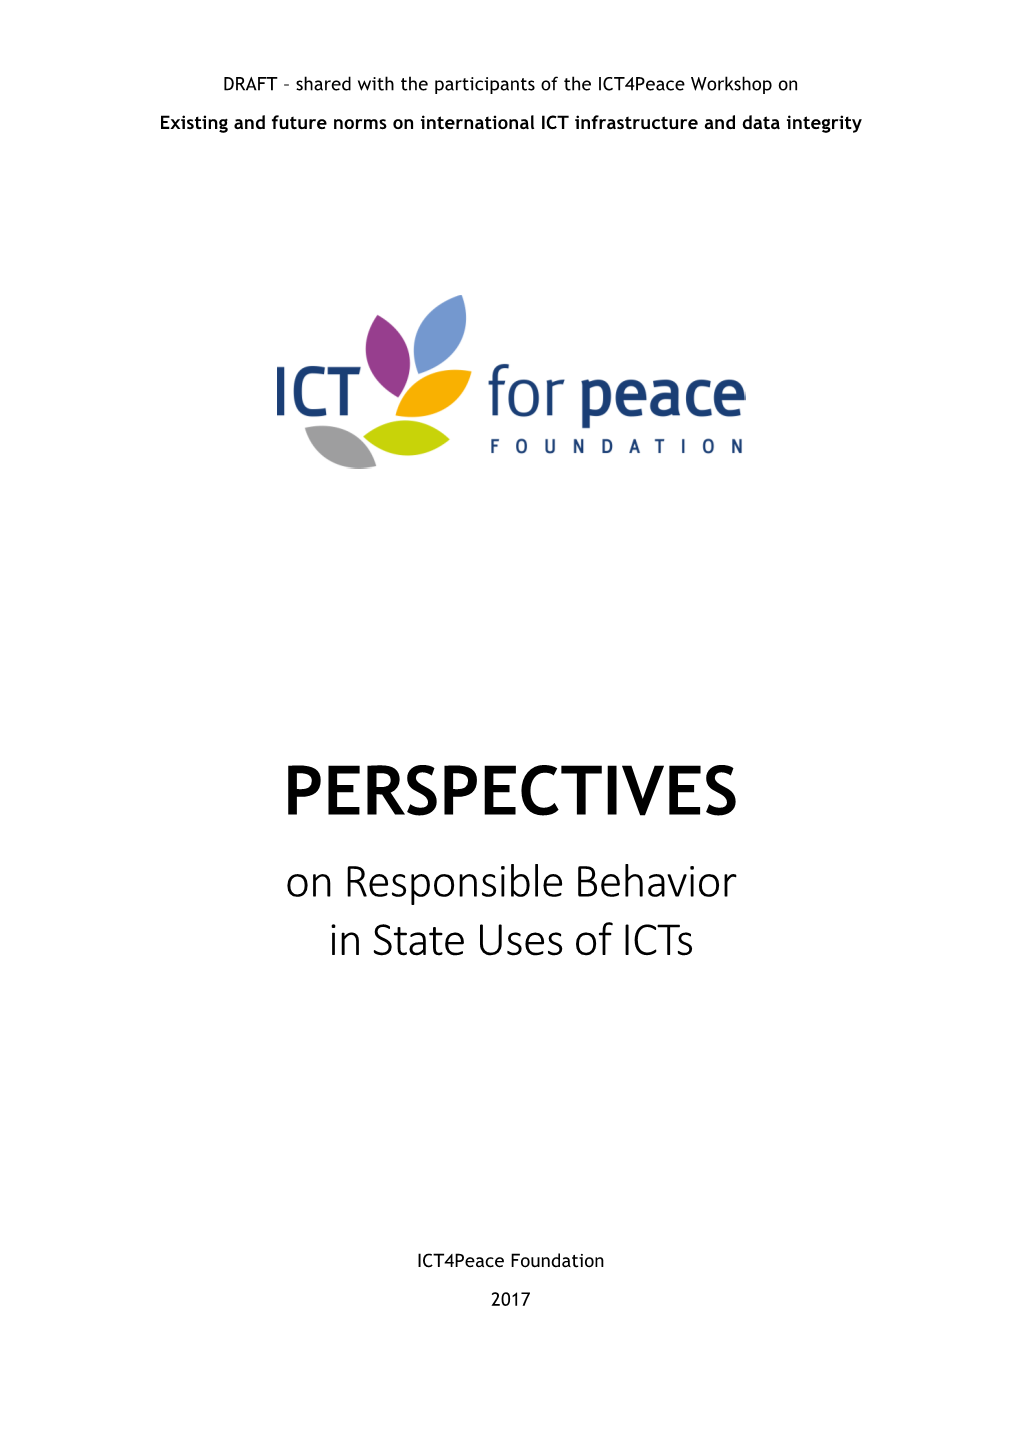 PERSPECTIVES on Responsible Behavior in State Uses of Icts